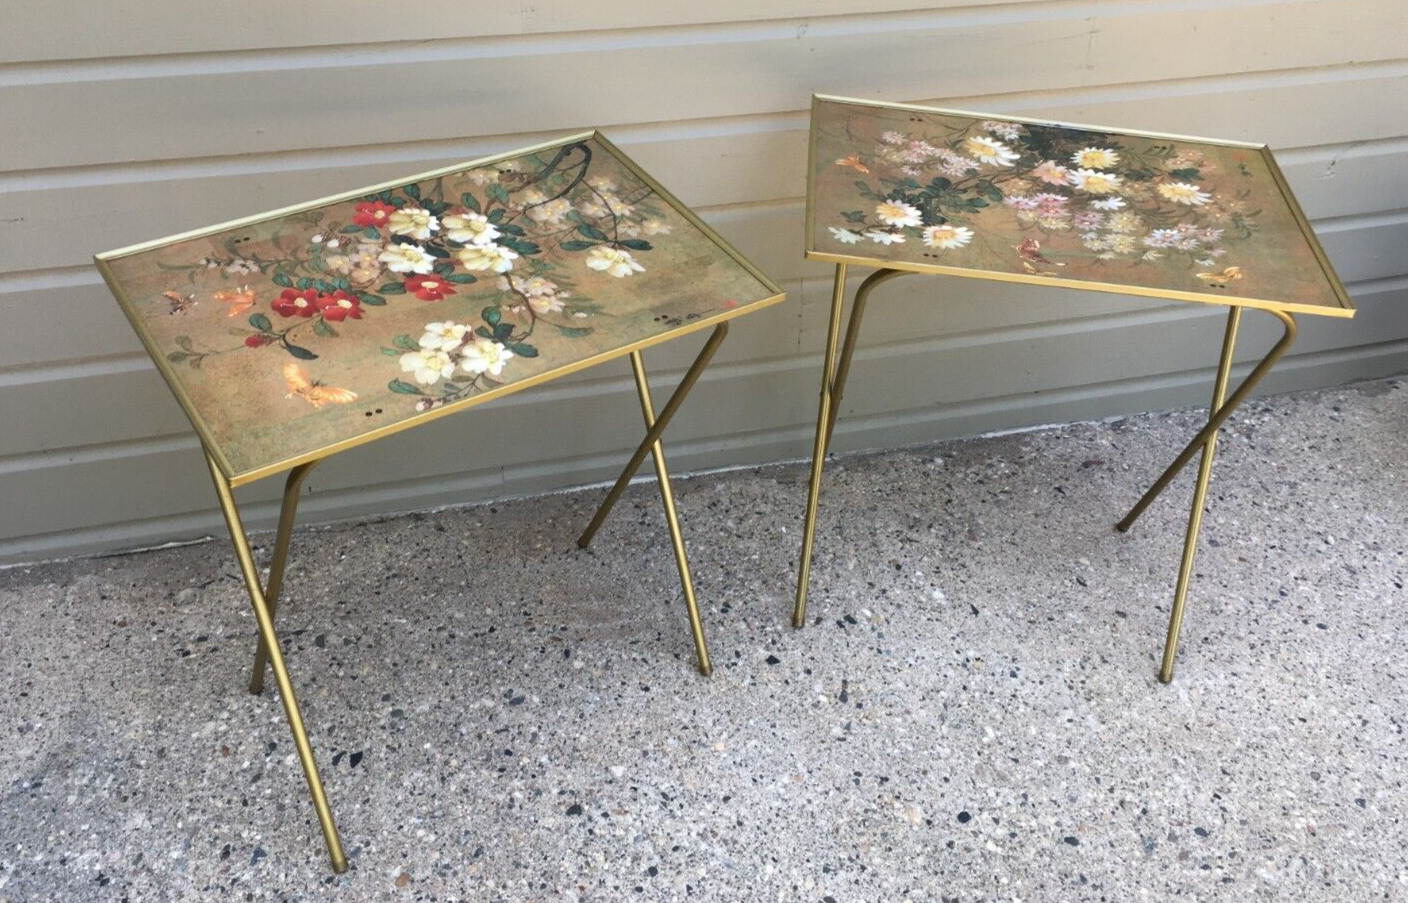 **Set of TWO Vintage MCM TV TRAY TABLES BUTTERFLY FLORAL GOLD Hollywood Regency